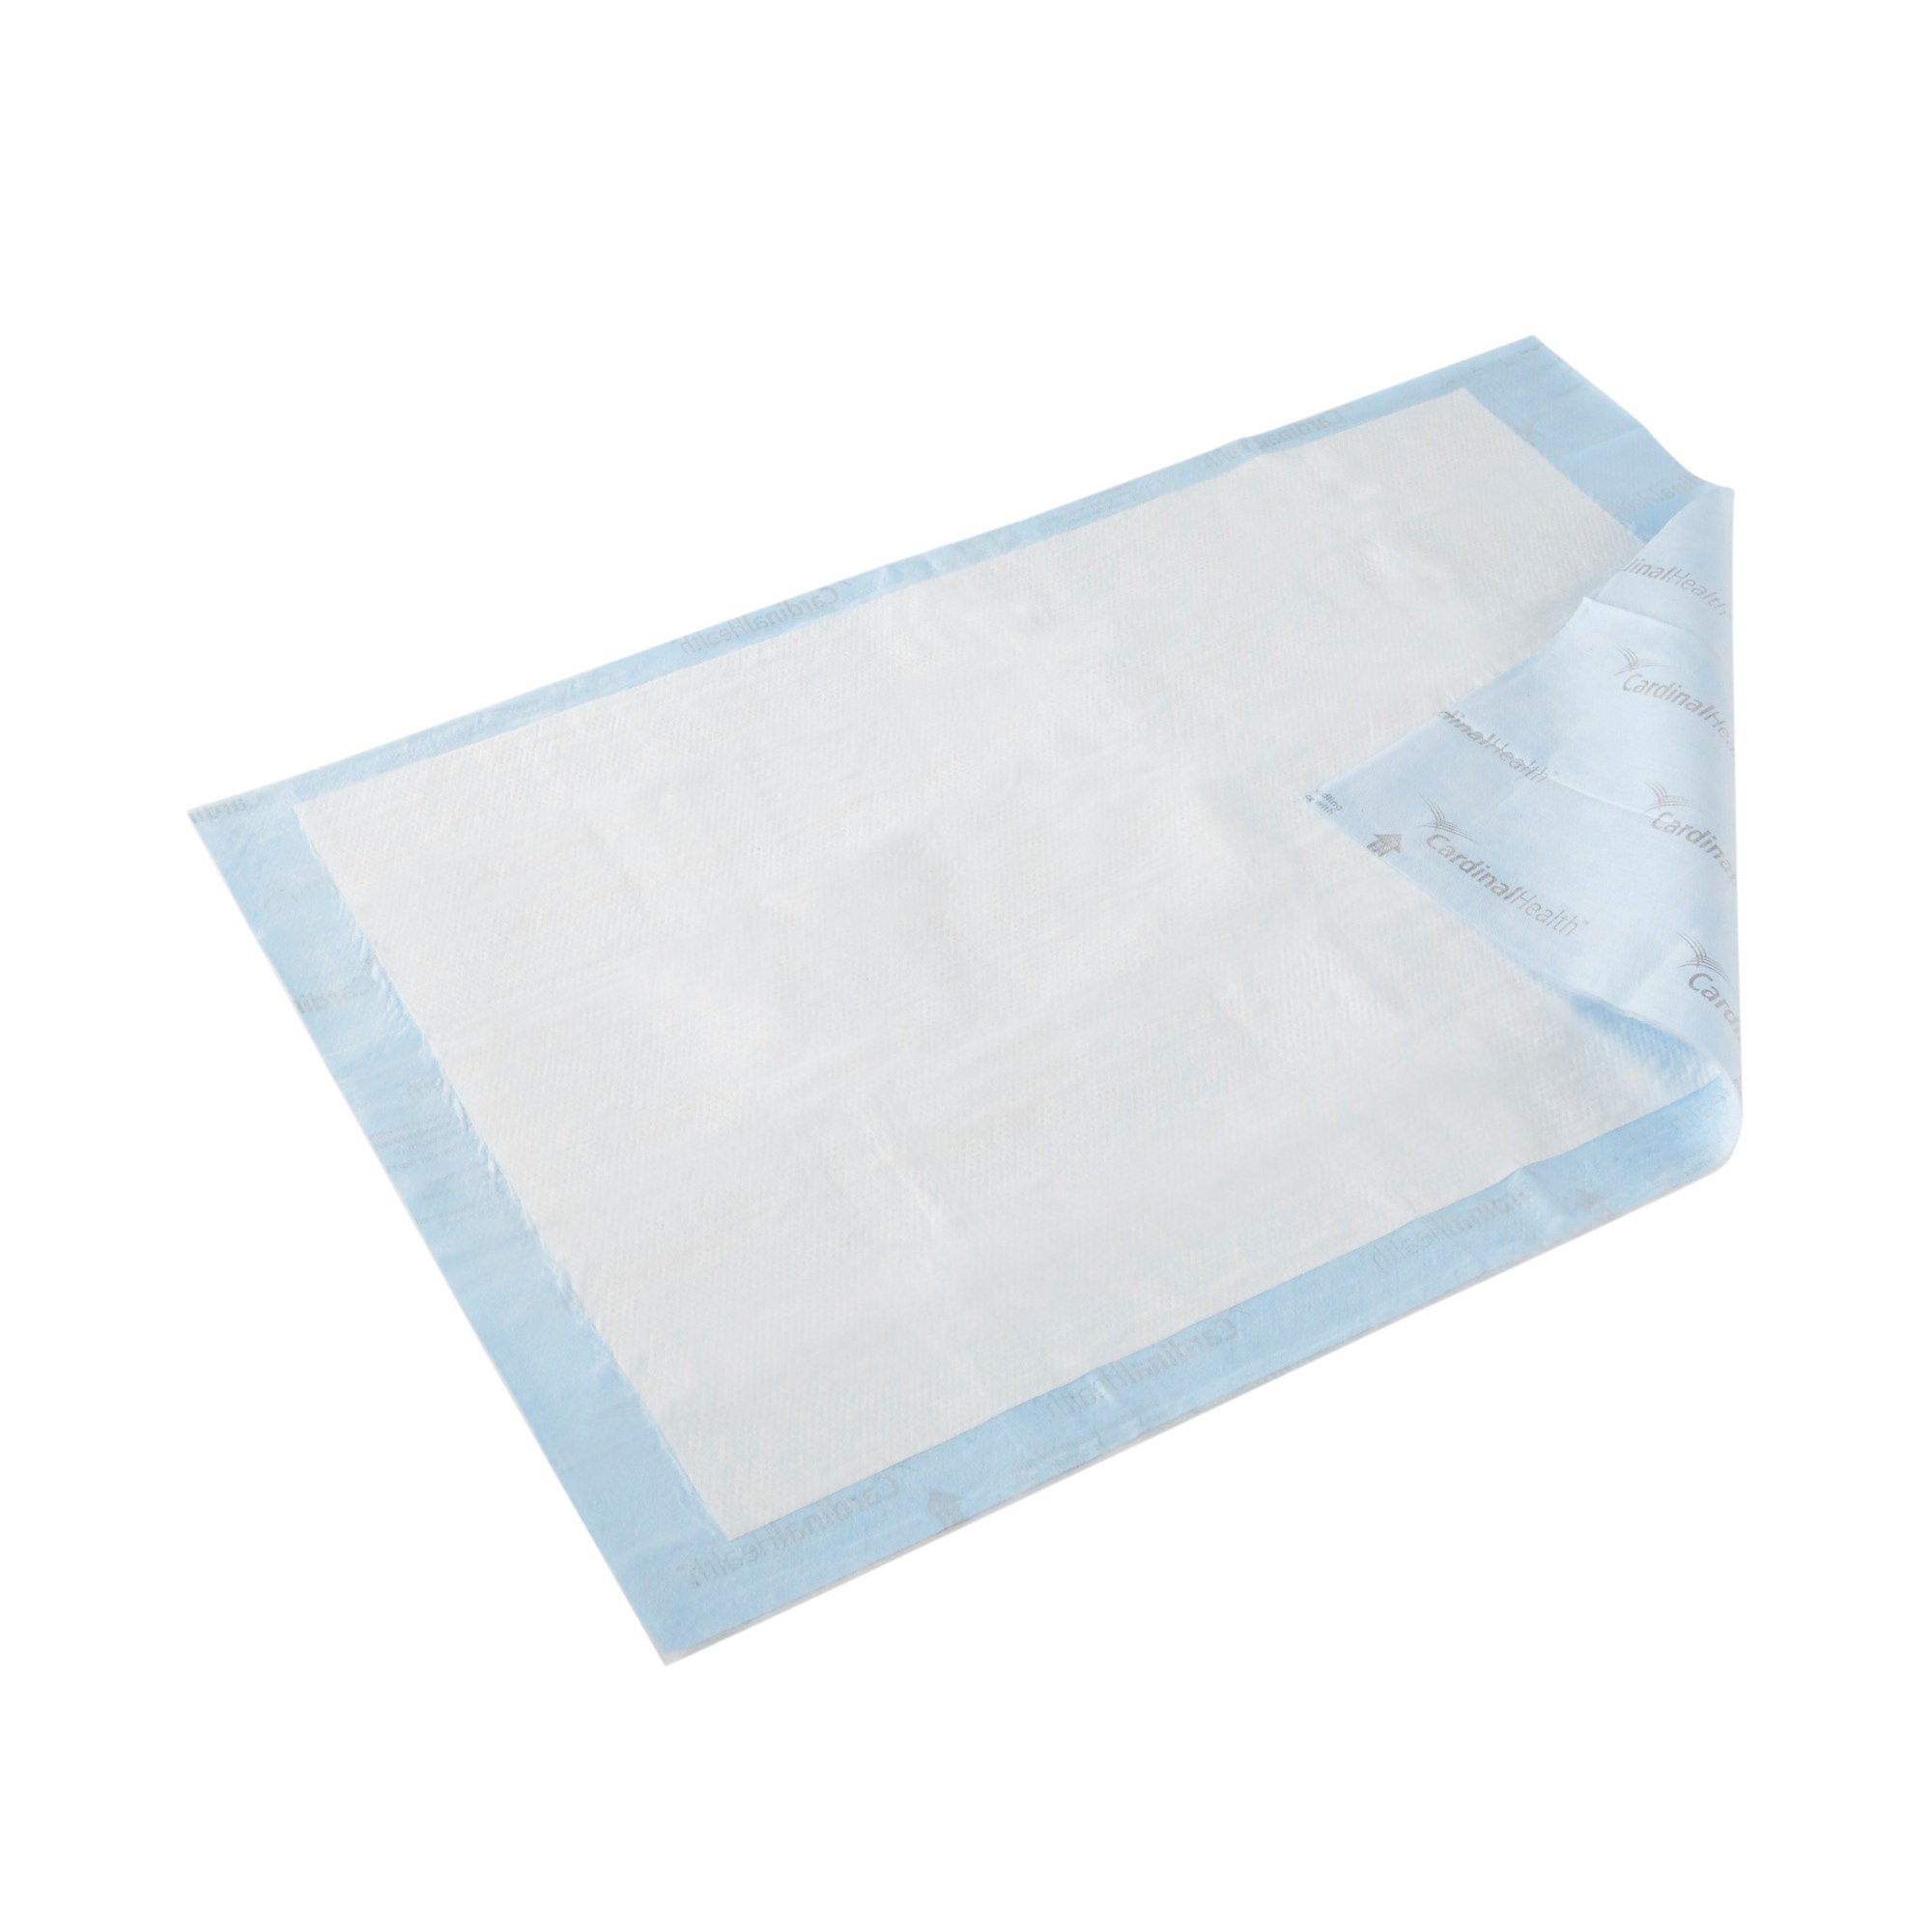 Wings Quilted Premium Comfort Maximum Absorbency Low Air Loss Positioning Underpad, 23 x 36 Inch